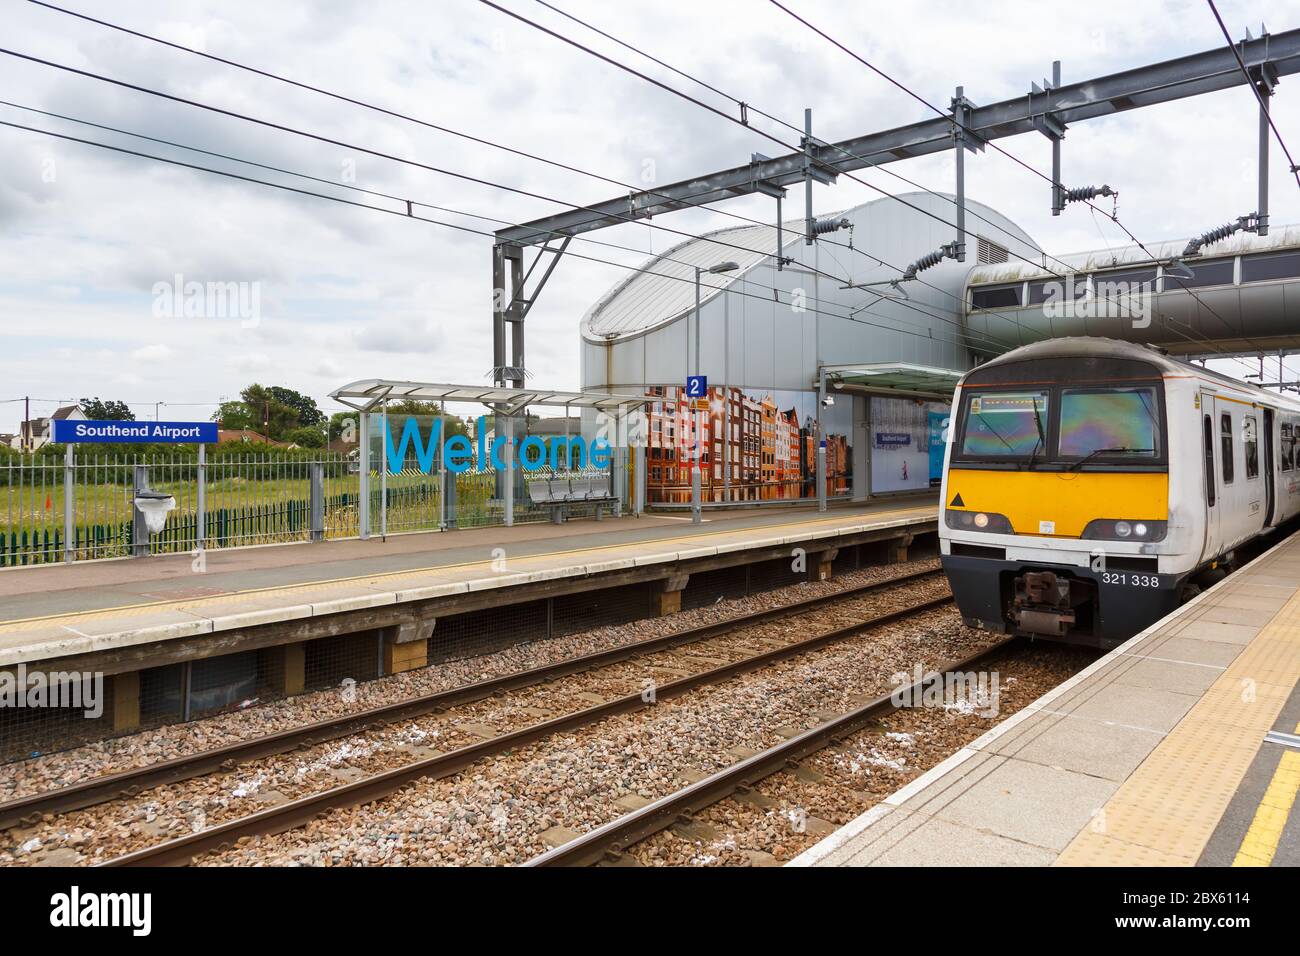 Southend, United Kingdom July 7, 2019: Railway Train Station at London Southend airport SEN in the United Kingdom. Stock Photo